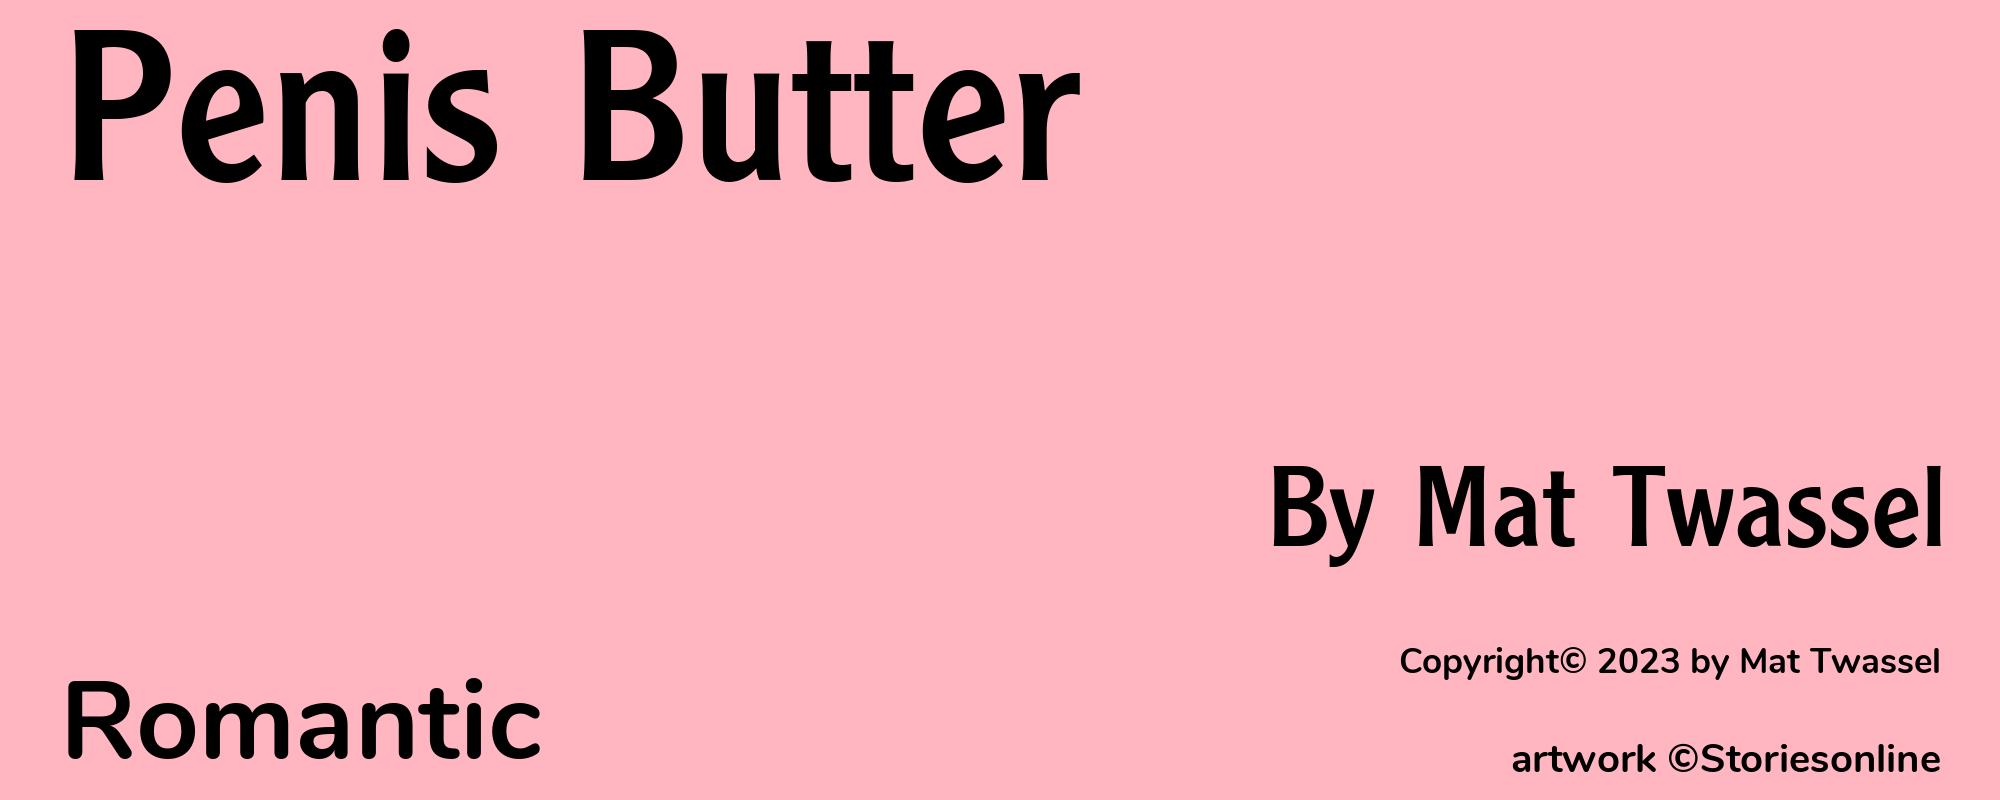 Penis Butter - Cover